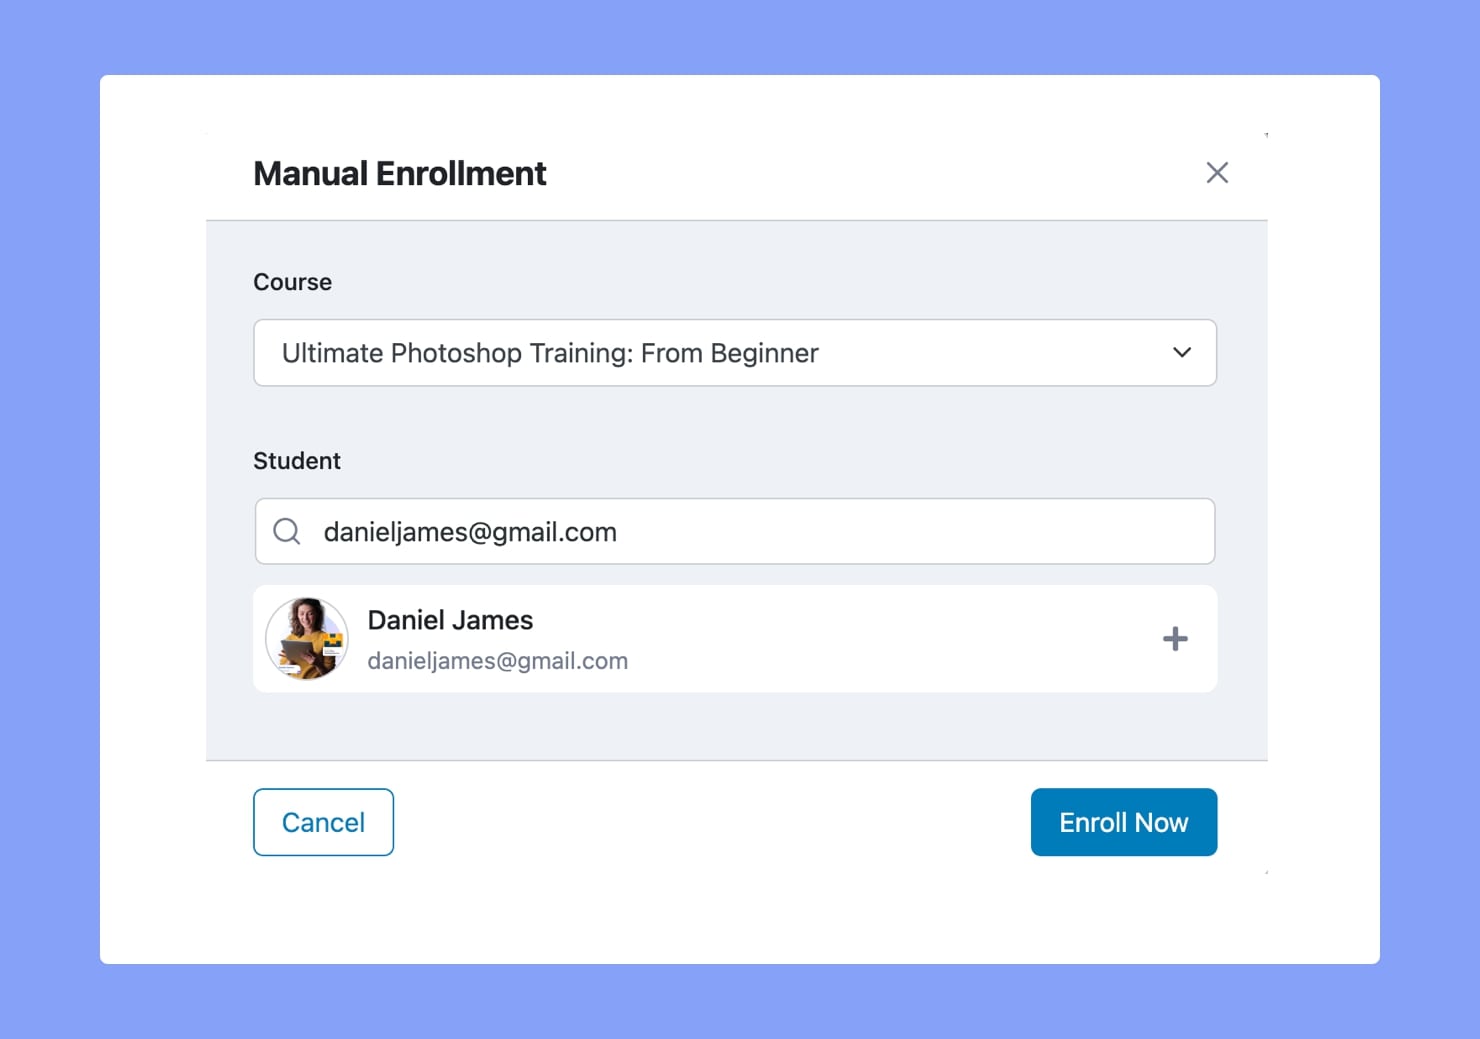 Manual Enrollment - Students Searchable by Email Address